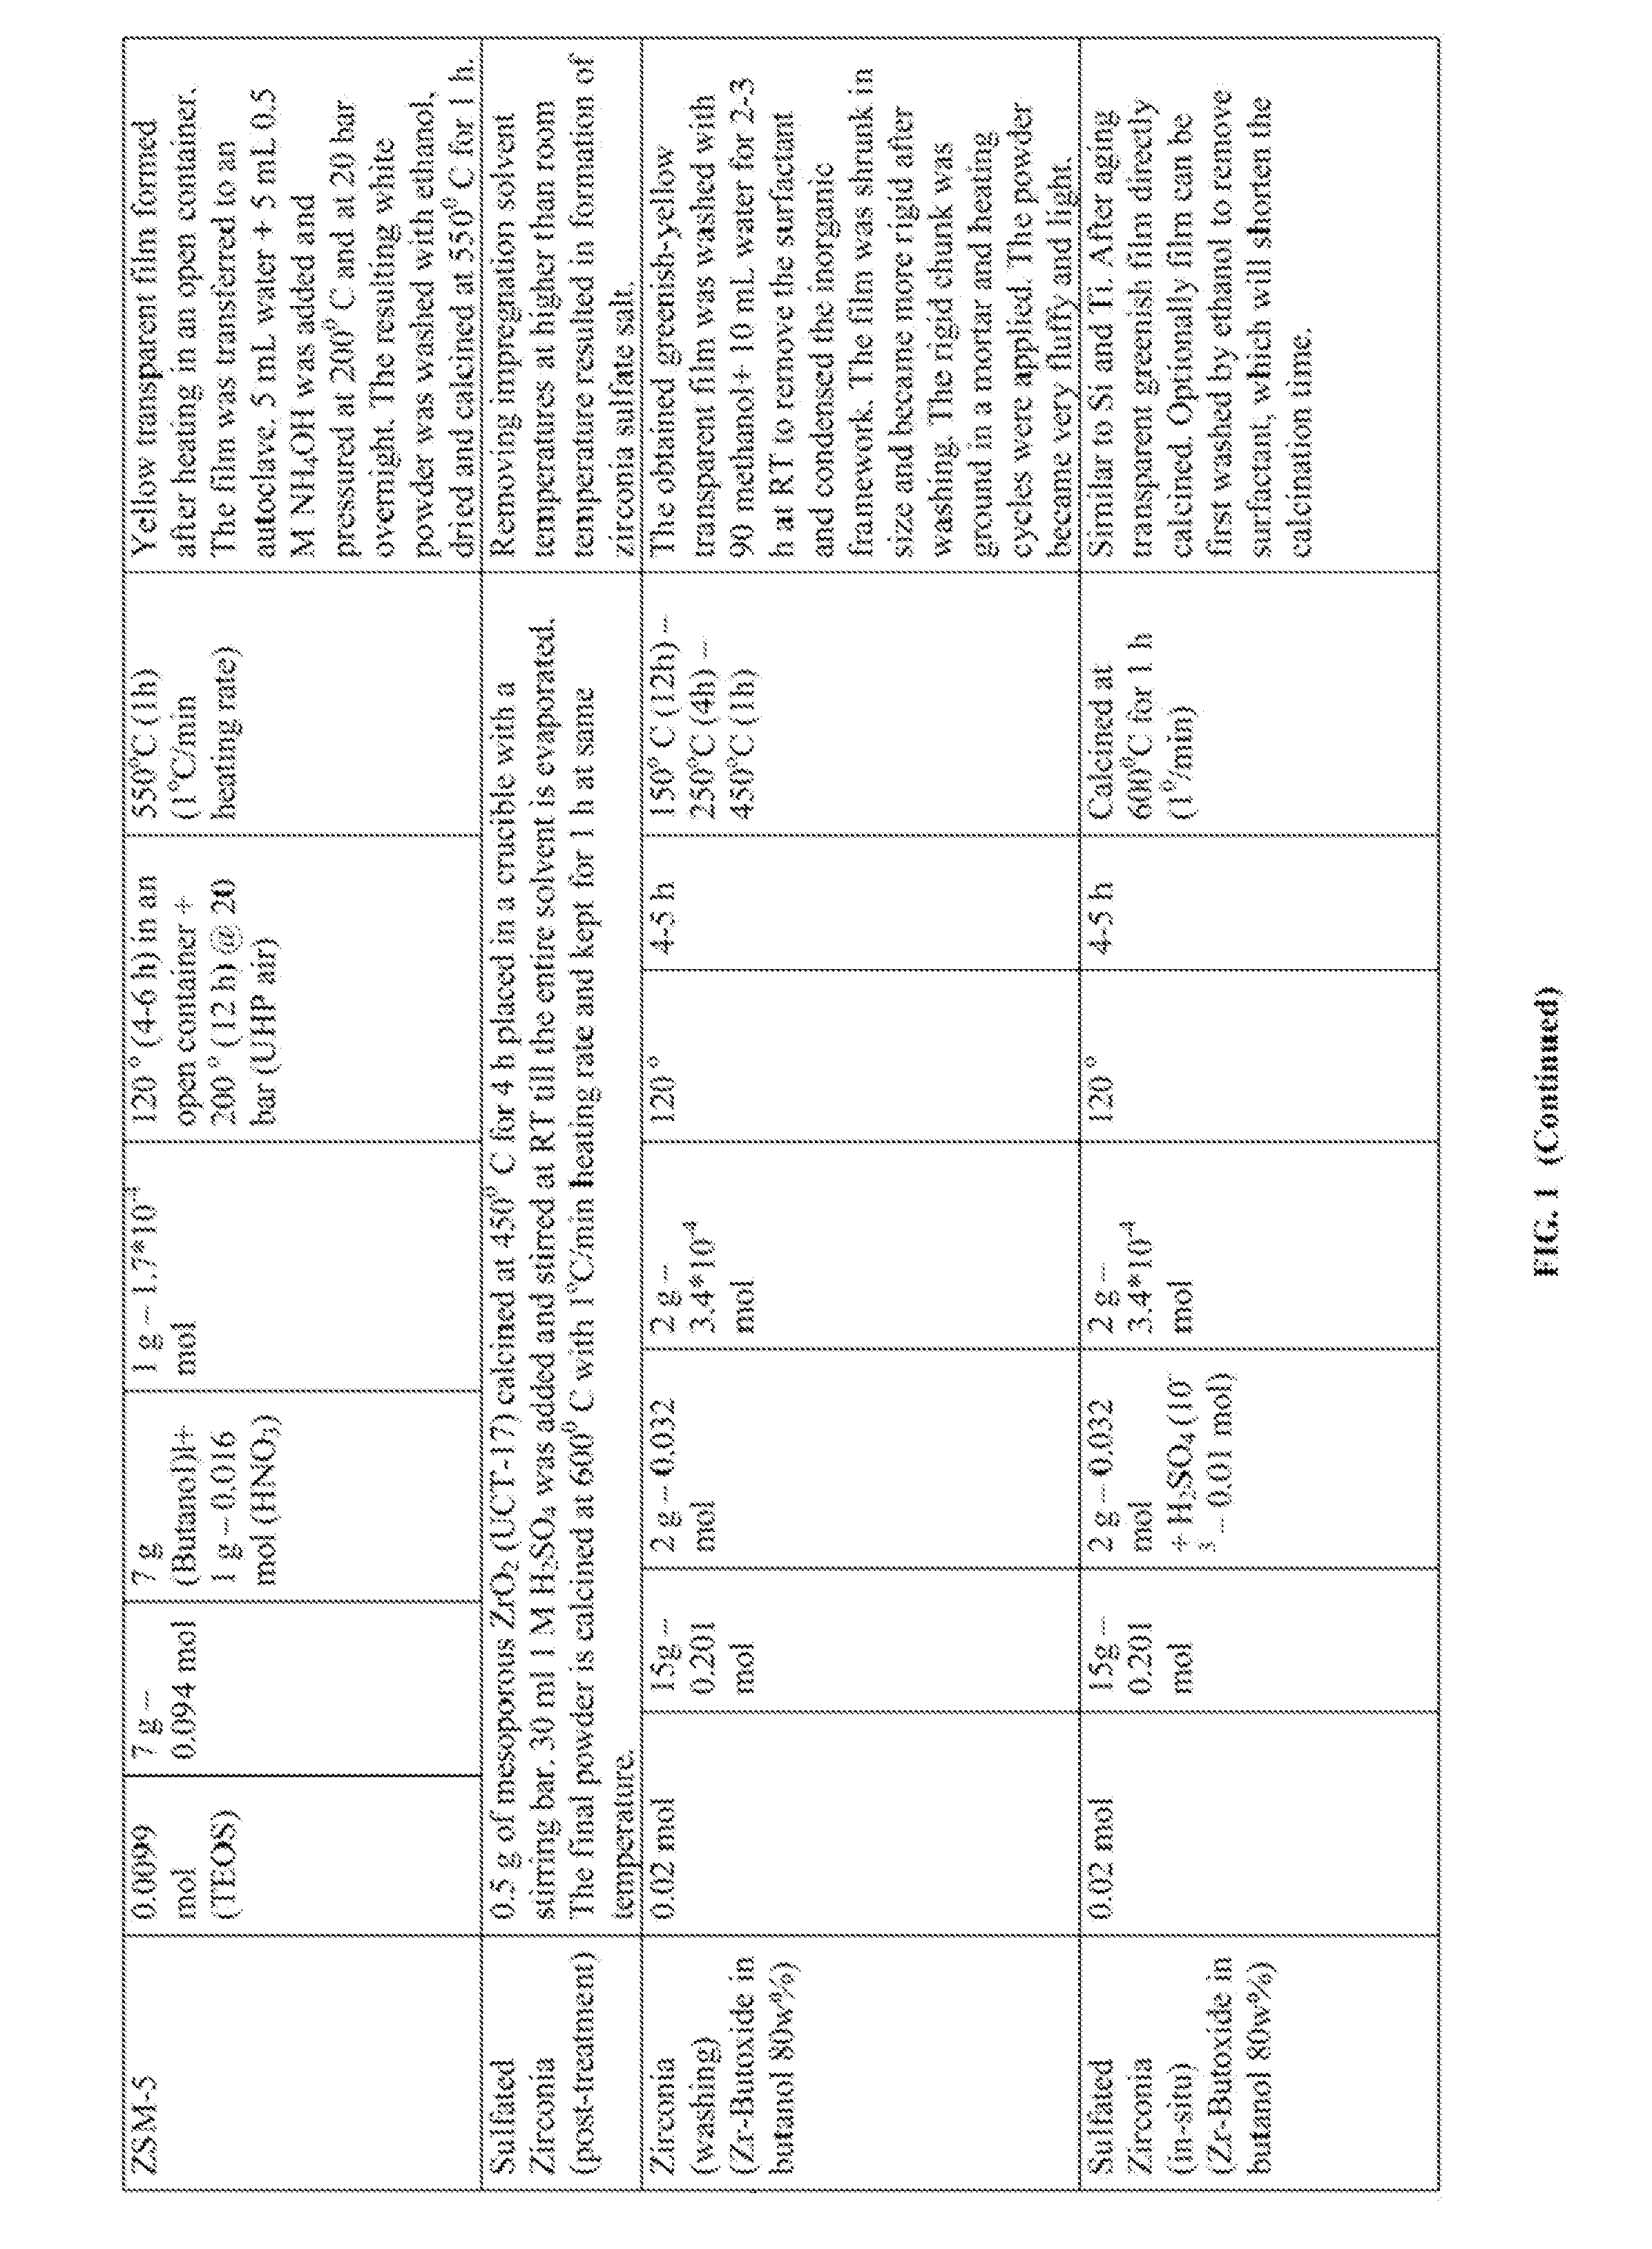 Mesoporous materials and processes for preparation thereof